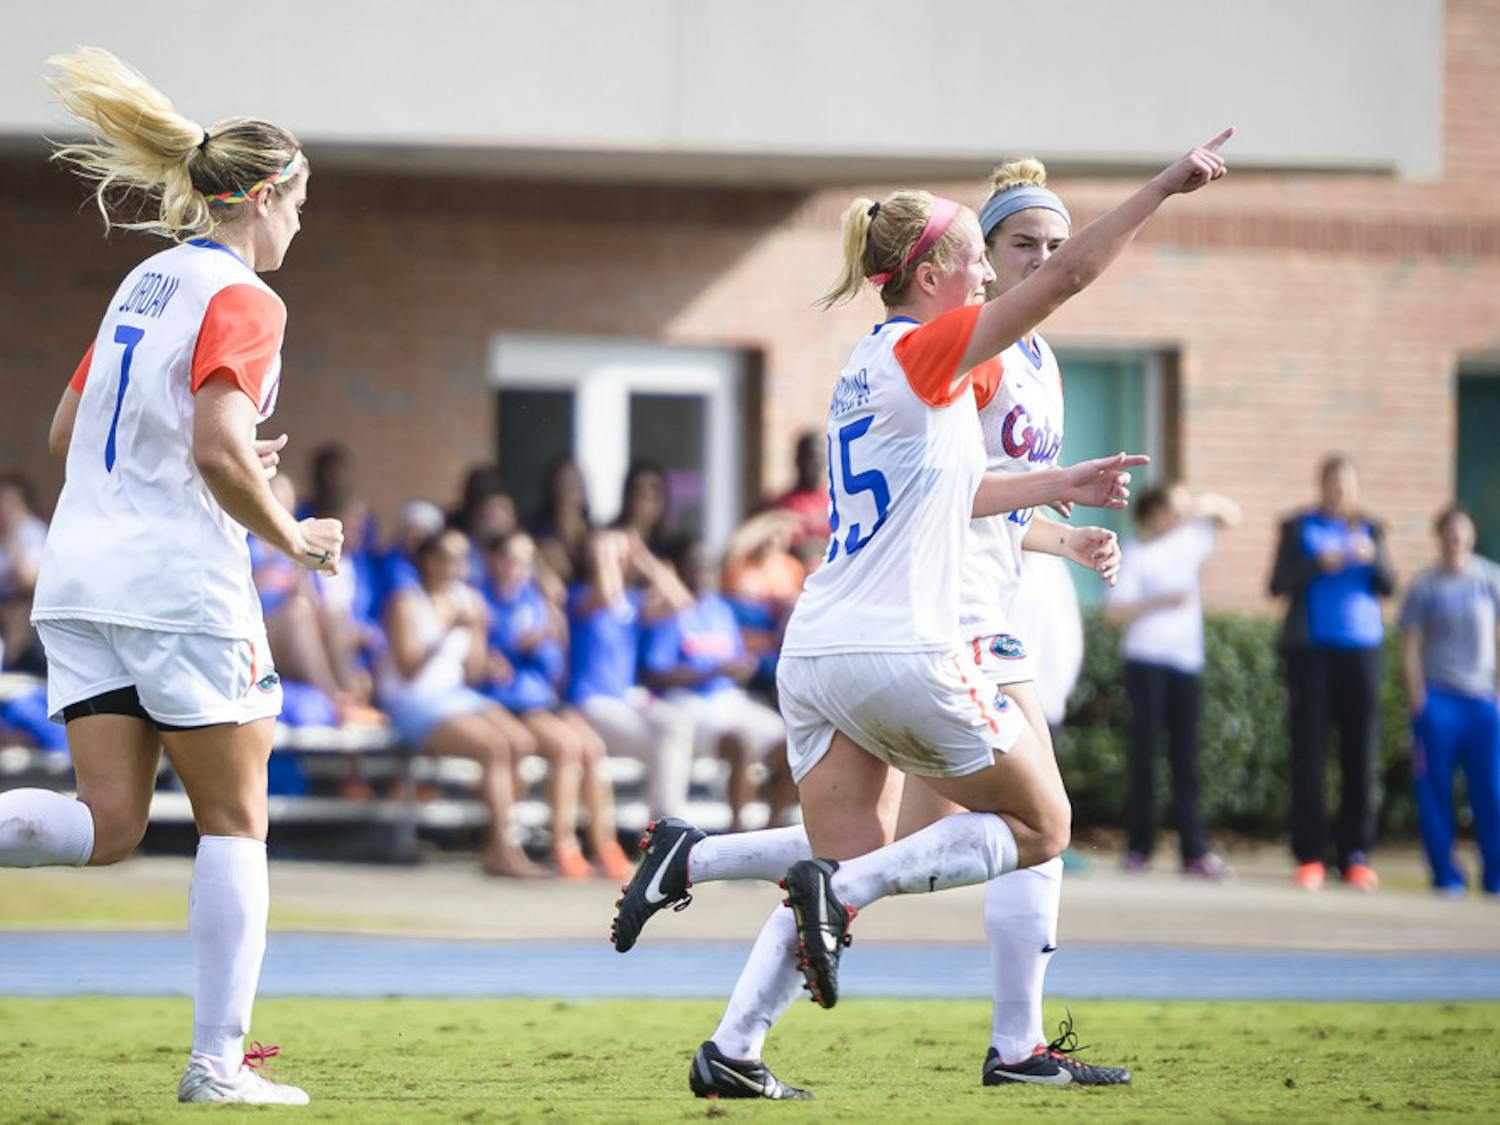 Junior Tessa Andujar celebrates her first goal of the season during Florida's 2-0 win against Jacksonville in the first round of the NCAA Tournament on Saturday at James G. Pressly Stadium.